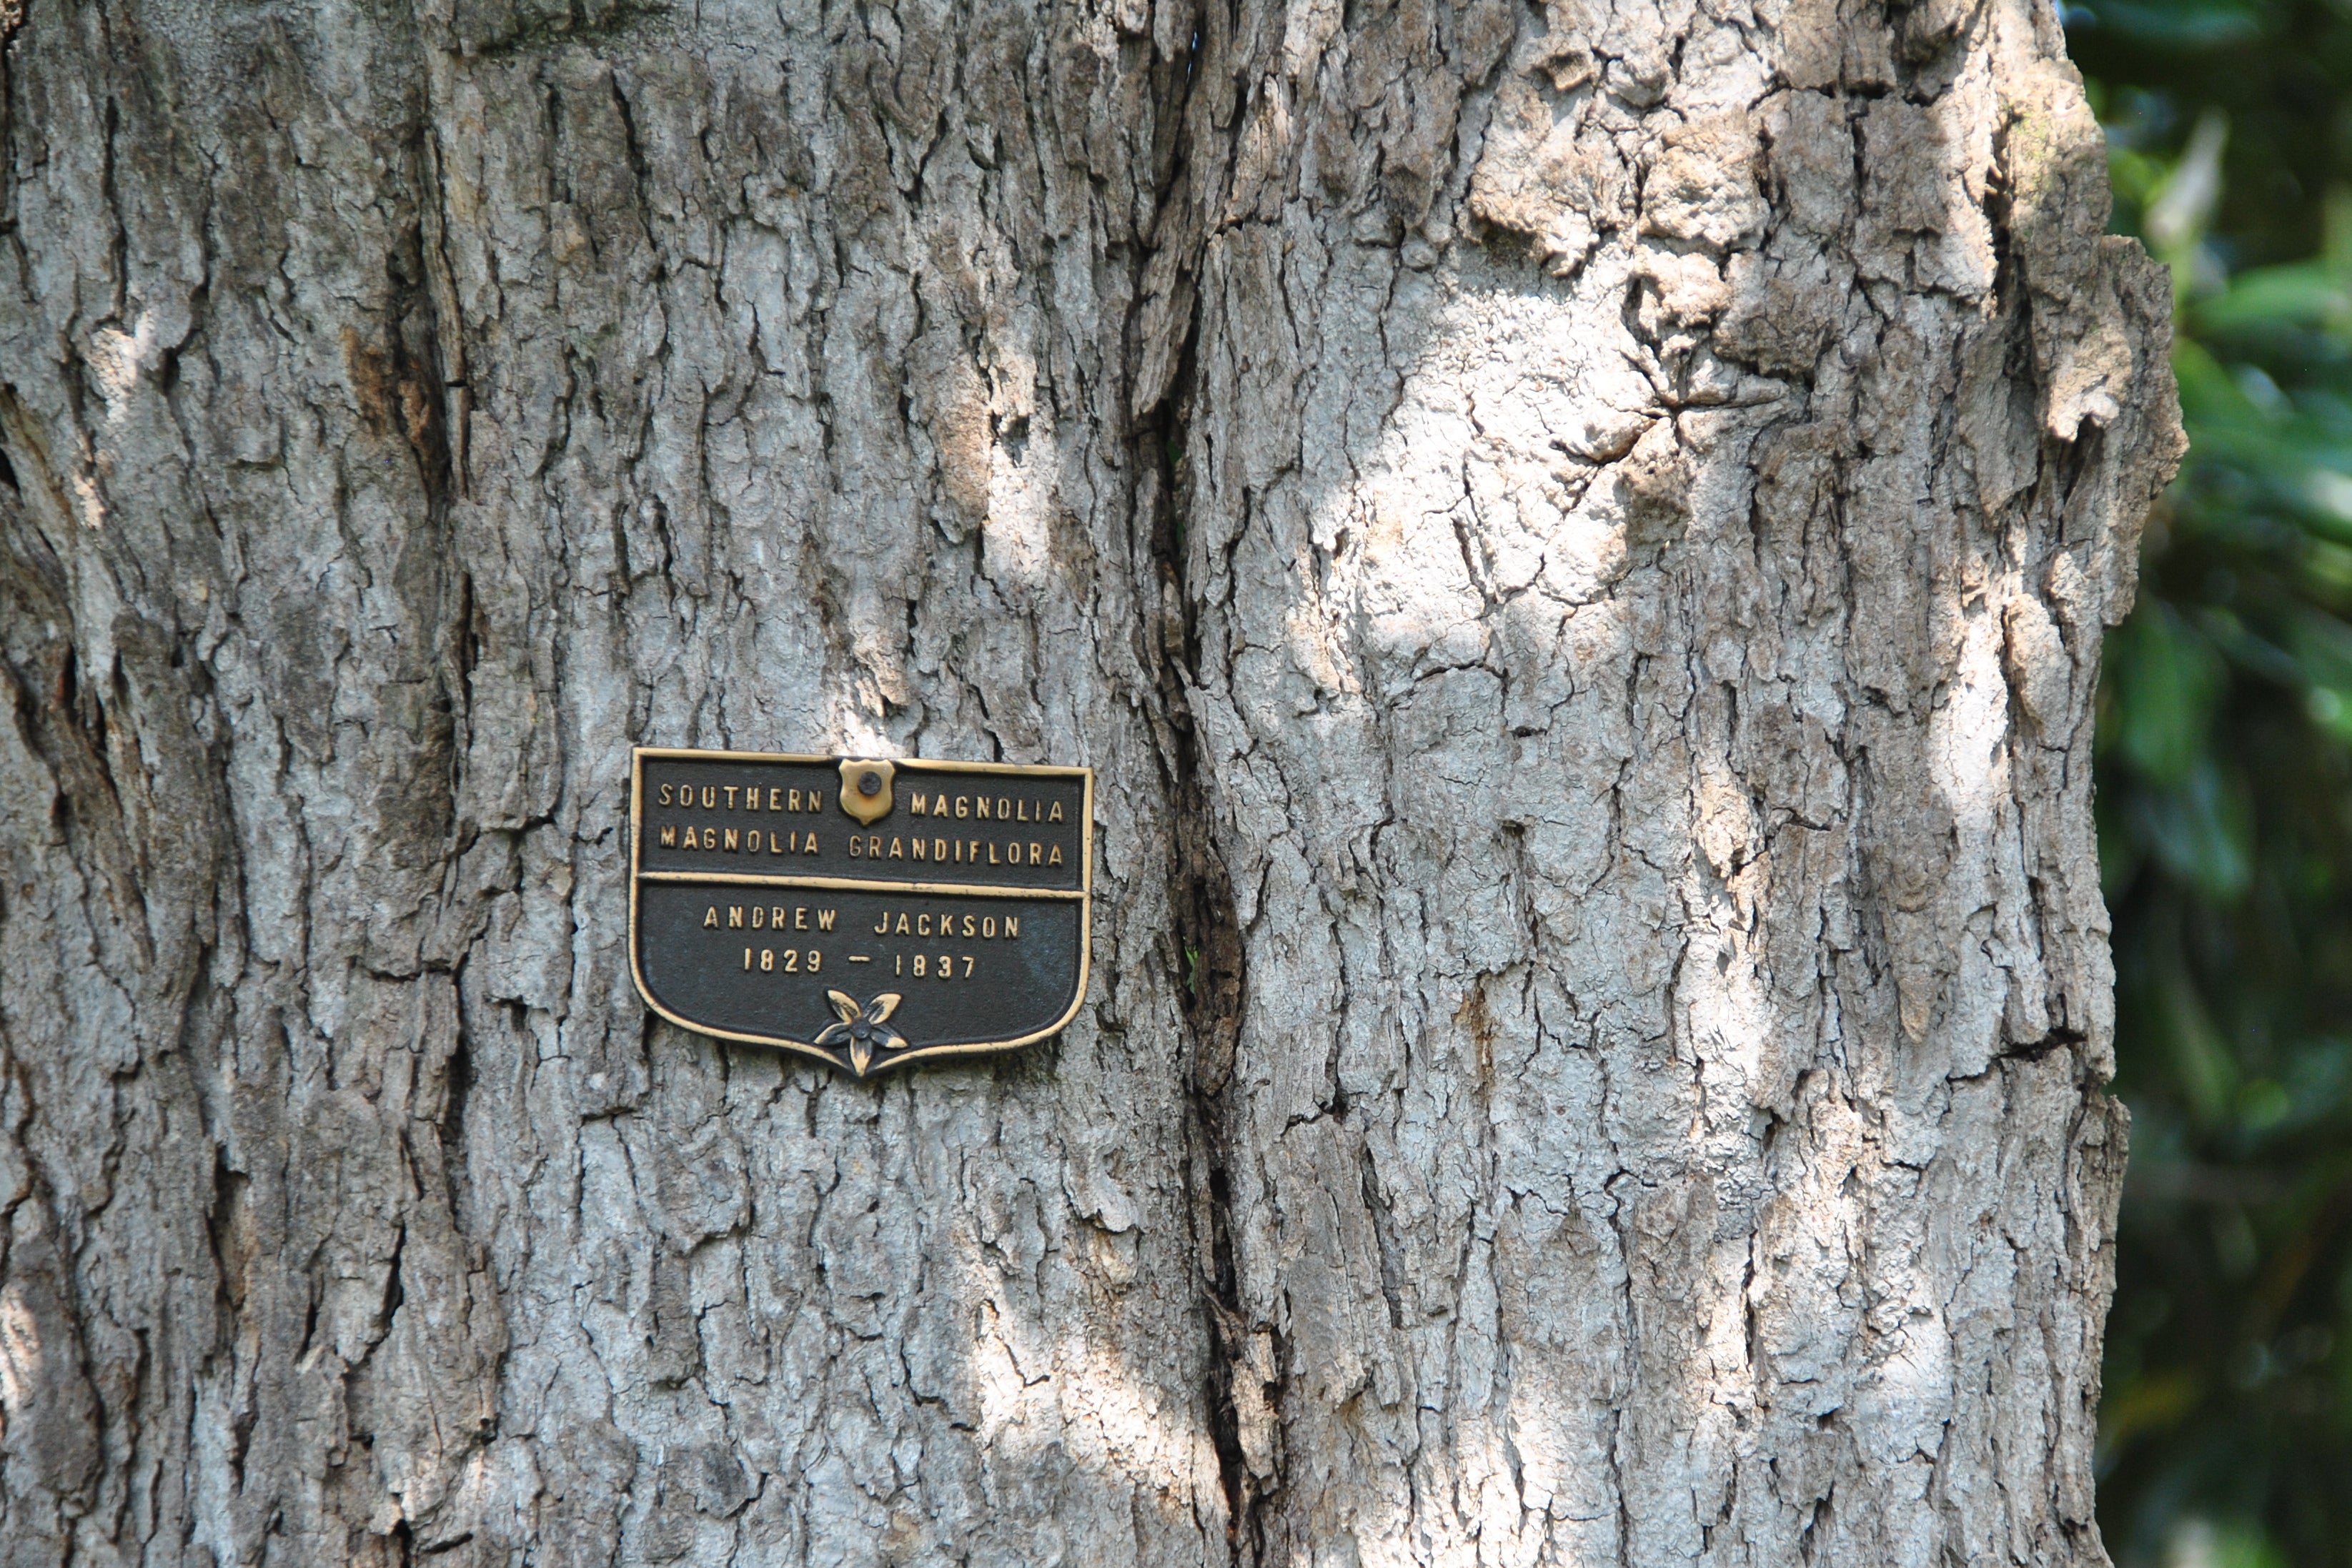 A sign marks the iconic Jackson Magnolia tree on the White House lawn in this April 21, 2012 photograph. 